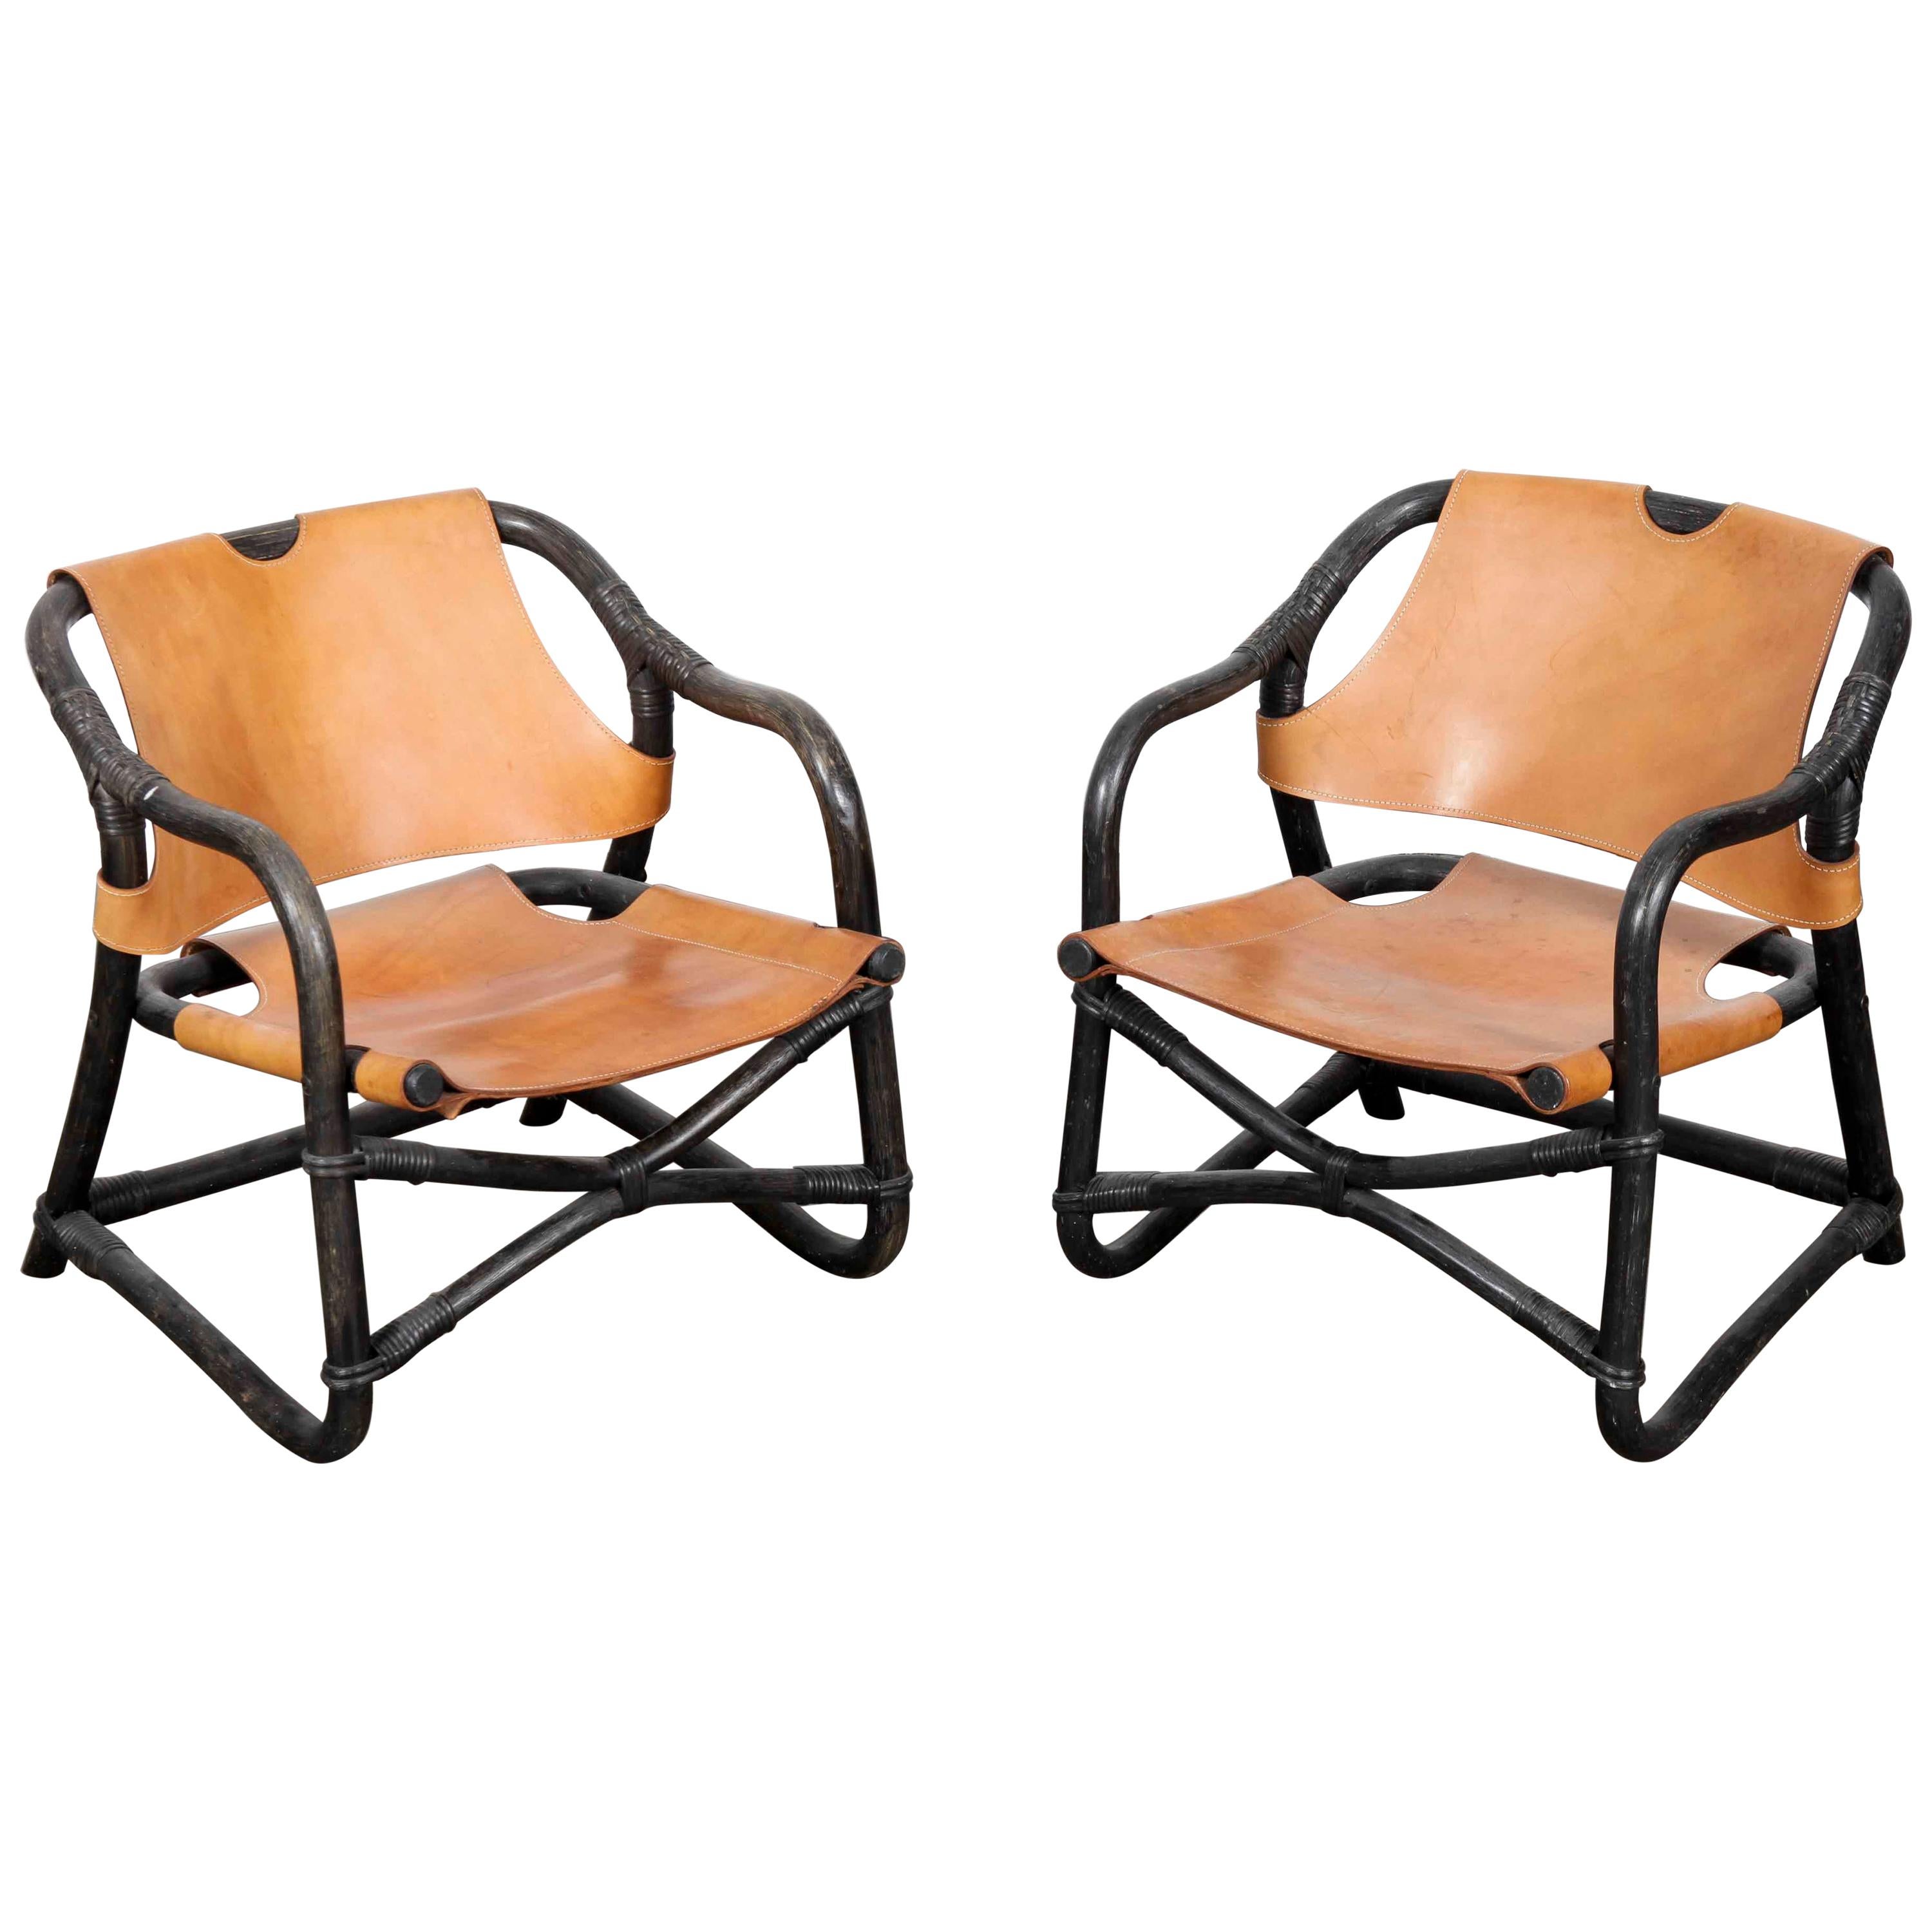 Pair of Swedish 1970s Black Lacquered Bamboo Chairs with Saddle Leather